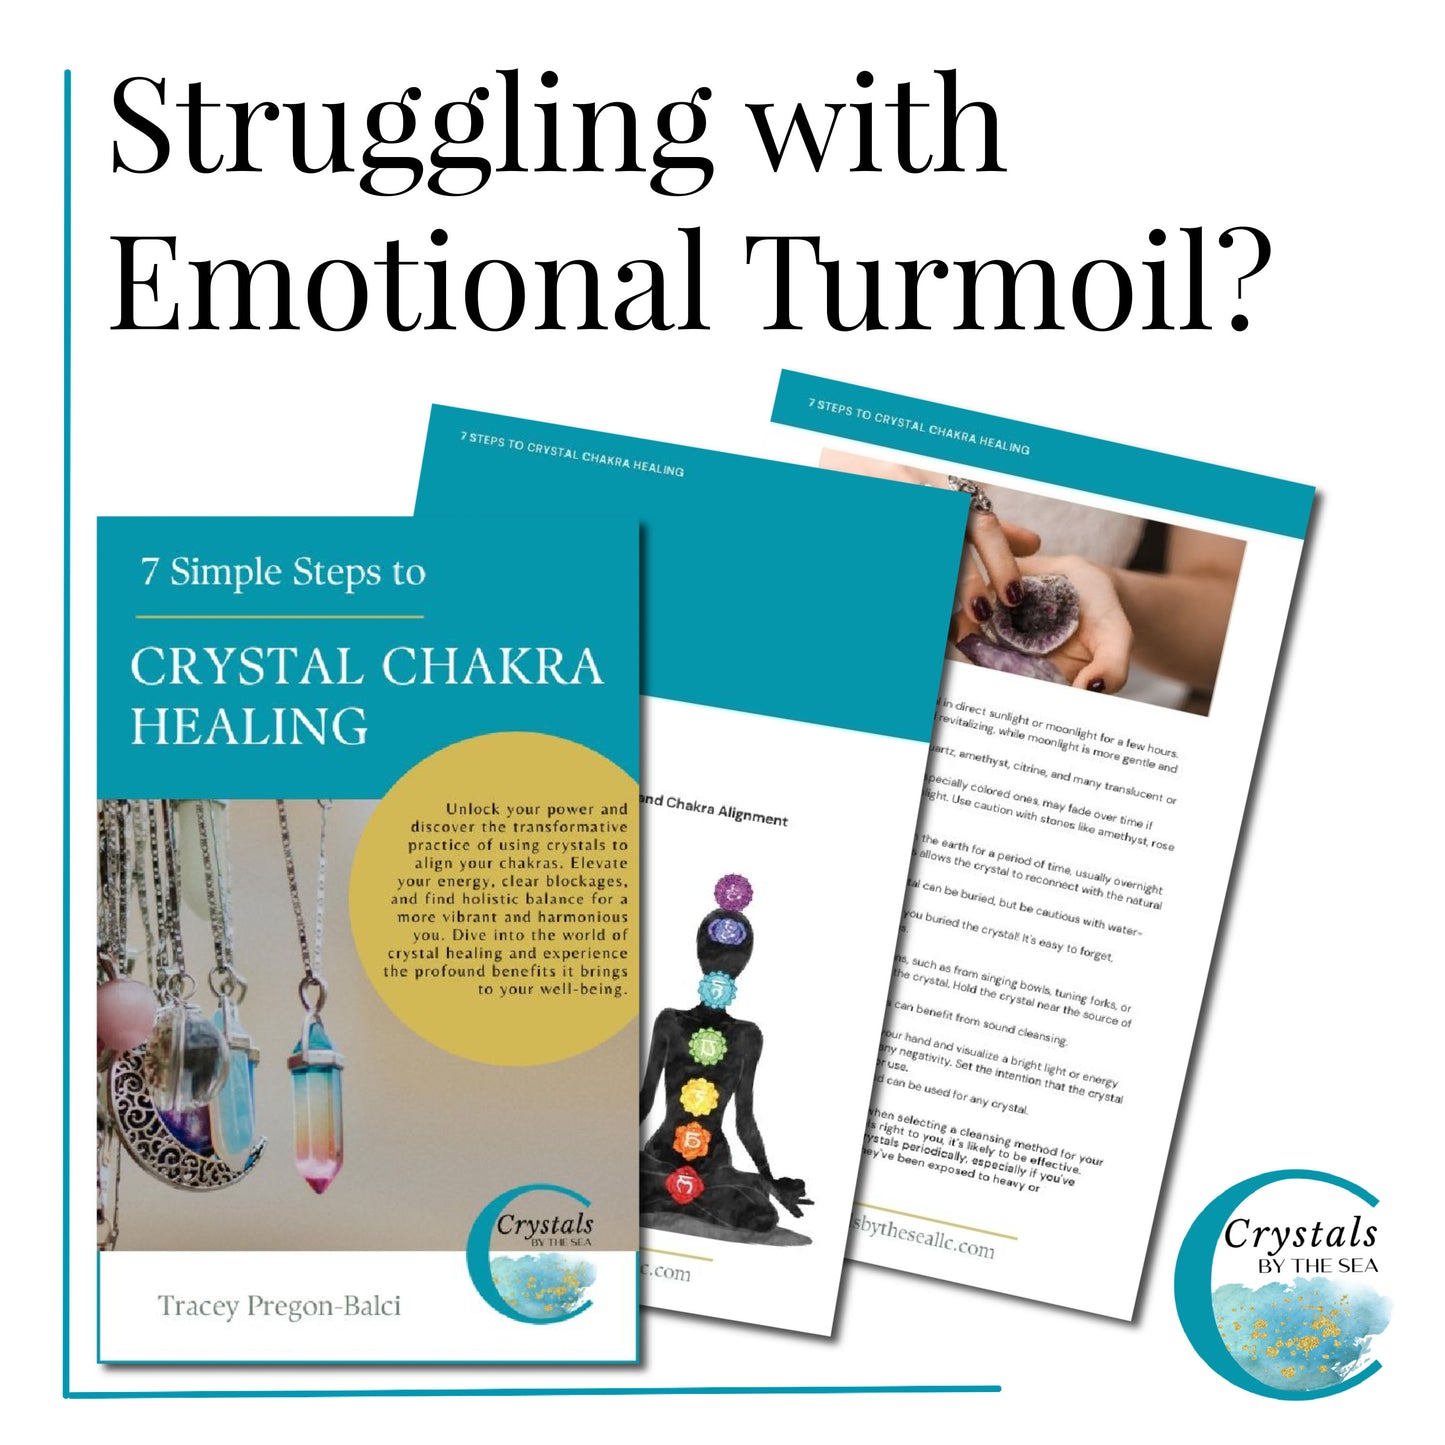 Find Alignment and Balance with the 7 Simple Steps to Crystal Chakra Healing ebook by Tracey Pregon-Balci